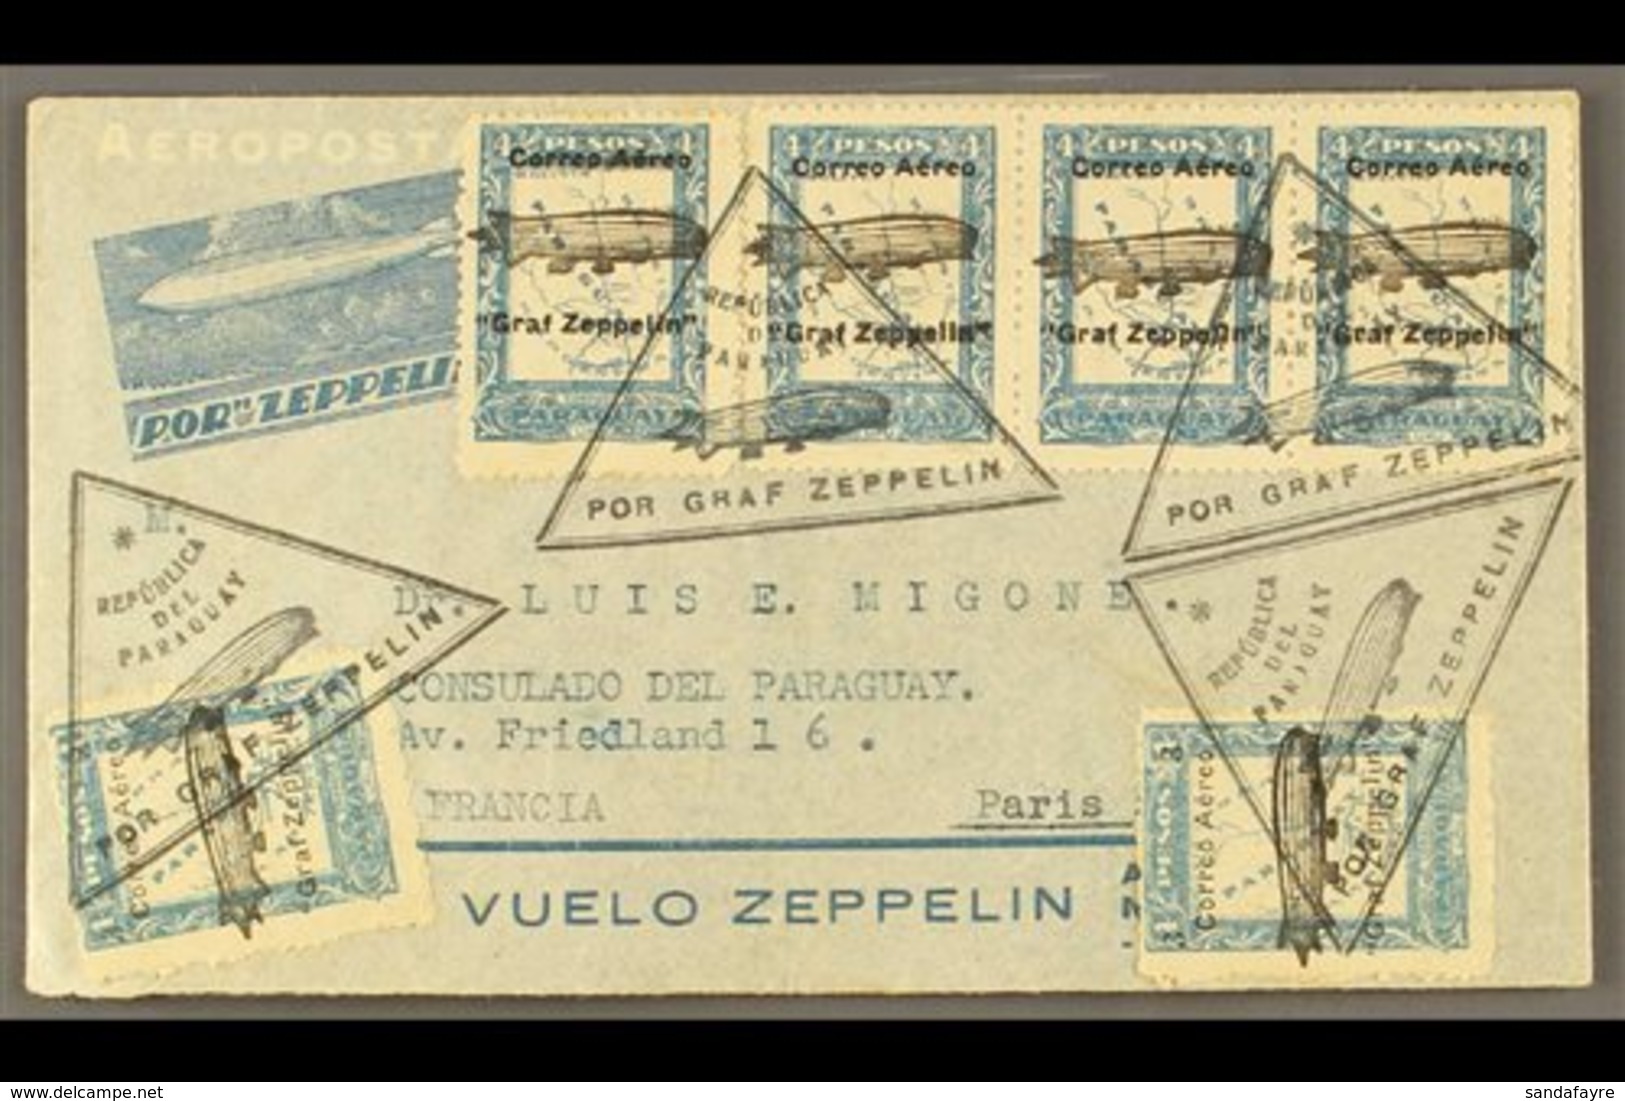 1931 Illustrated Zeppelin Stationery Air Letter To France Franked 3c On 4c Zeppelin Ovpt (2) And 4c Zeppelin Ovpt Stamp  - Paraguay